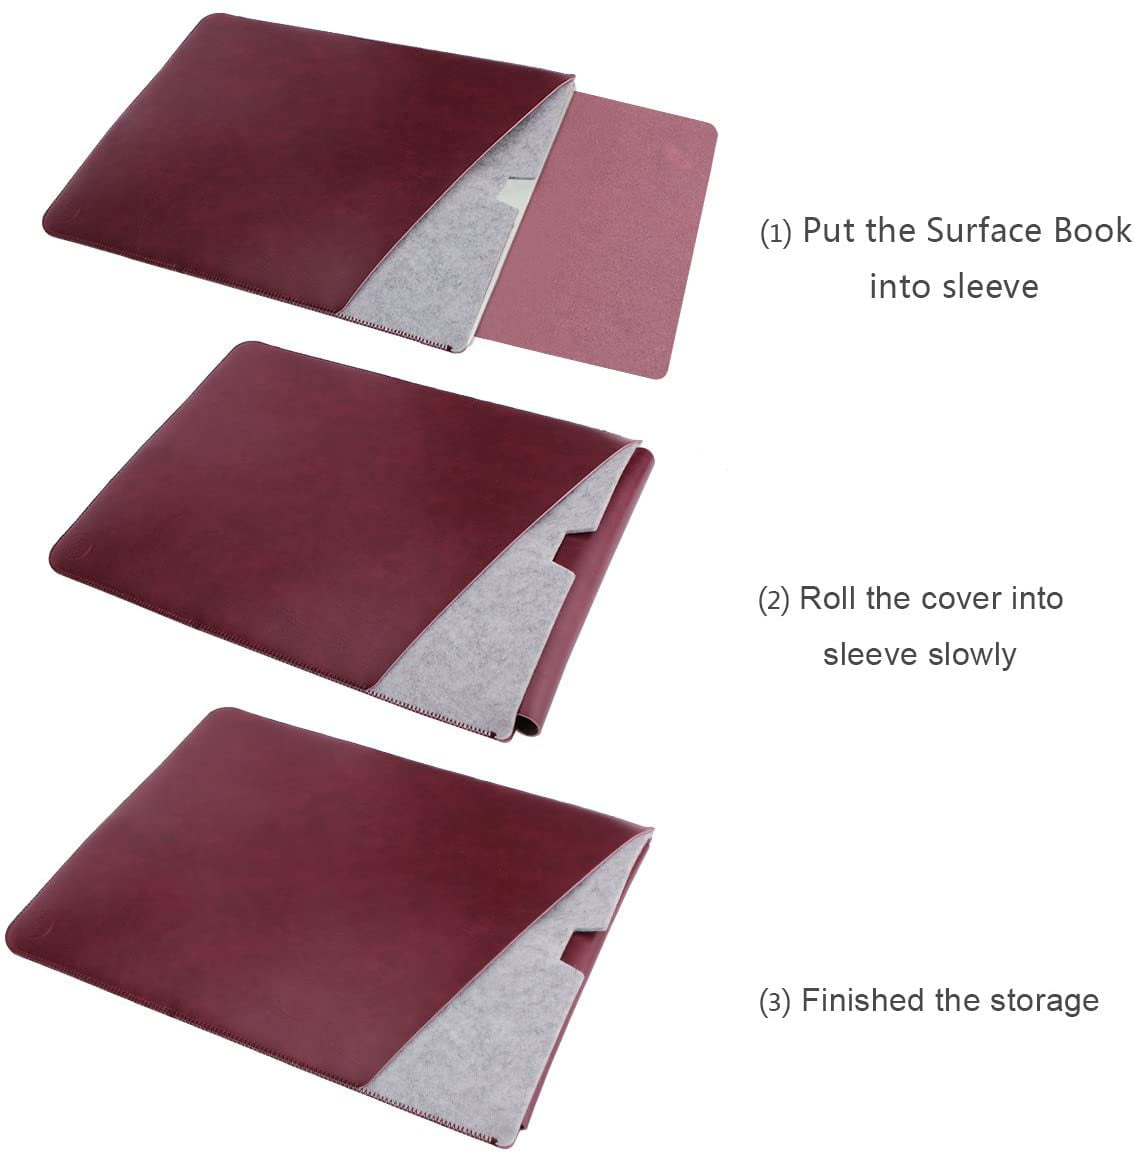 WALNEW 13.5 Microsoft Surface Book 2015/2016 Protective Soft Sleeve Case Surface Book 2 2017 Cover Bag with Safe Interior and Exterior Mouse Pad Wine Red 